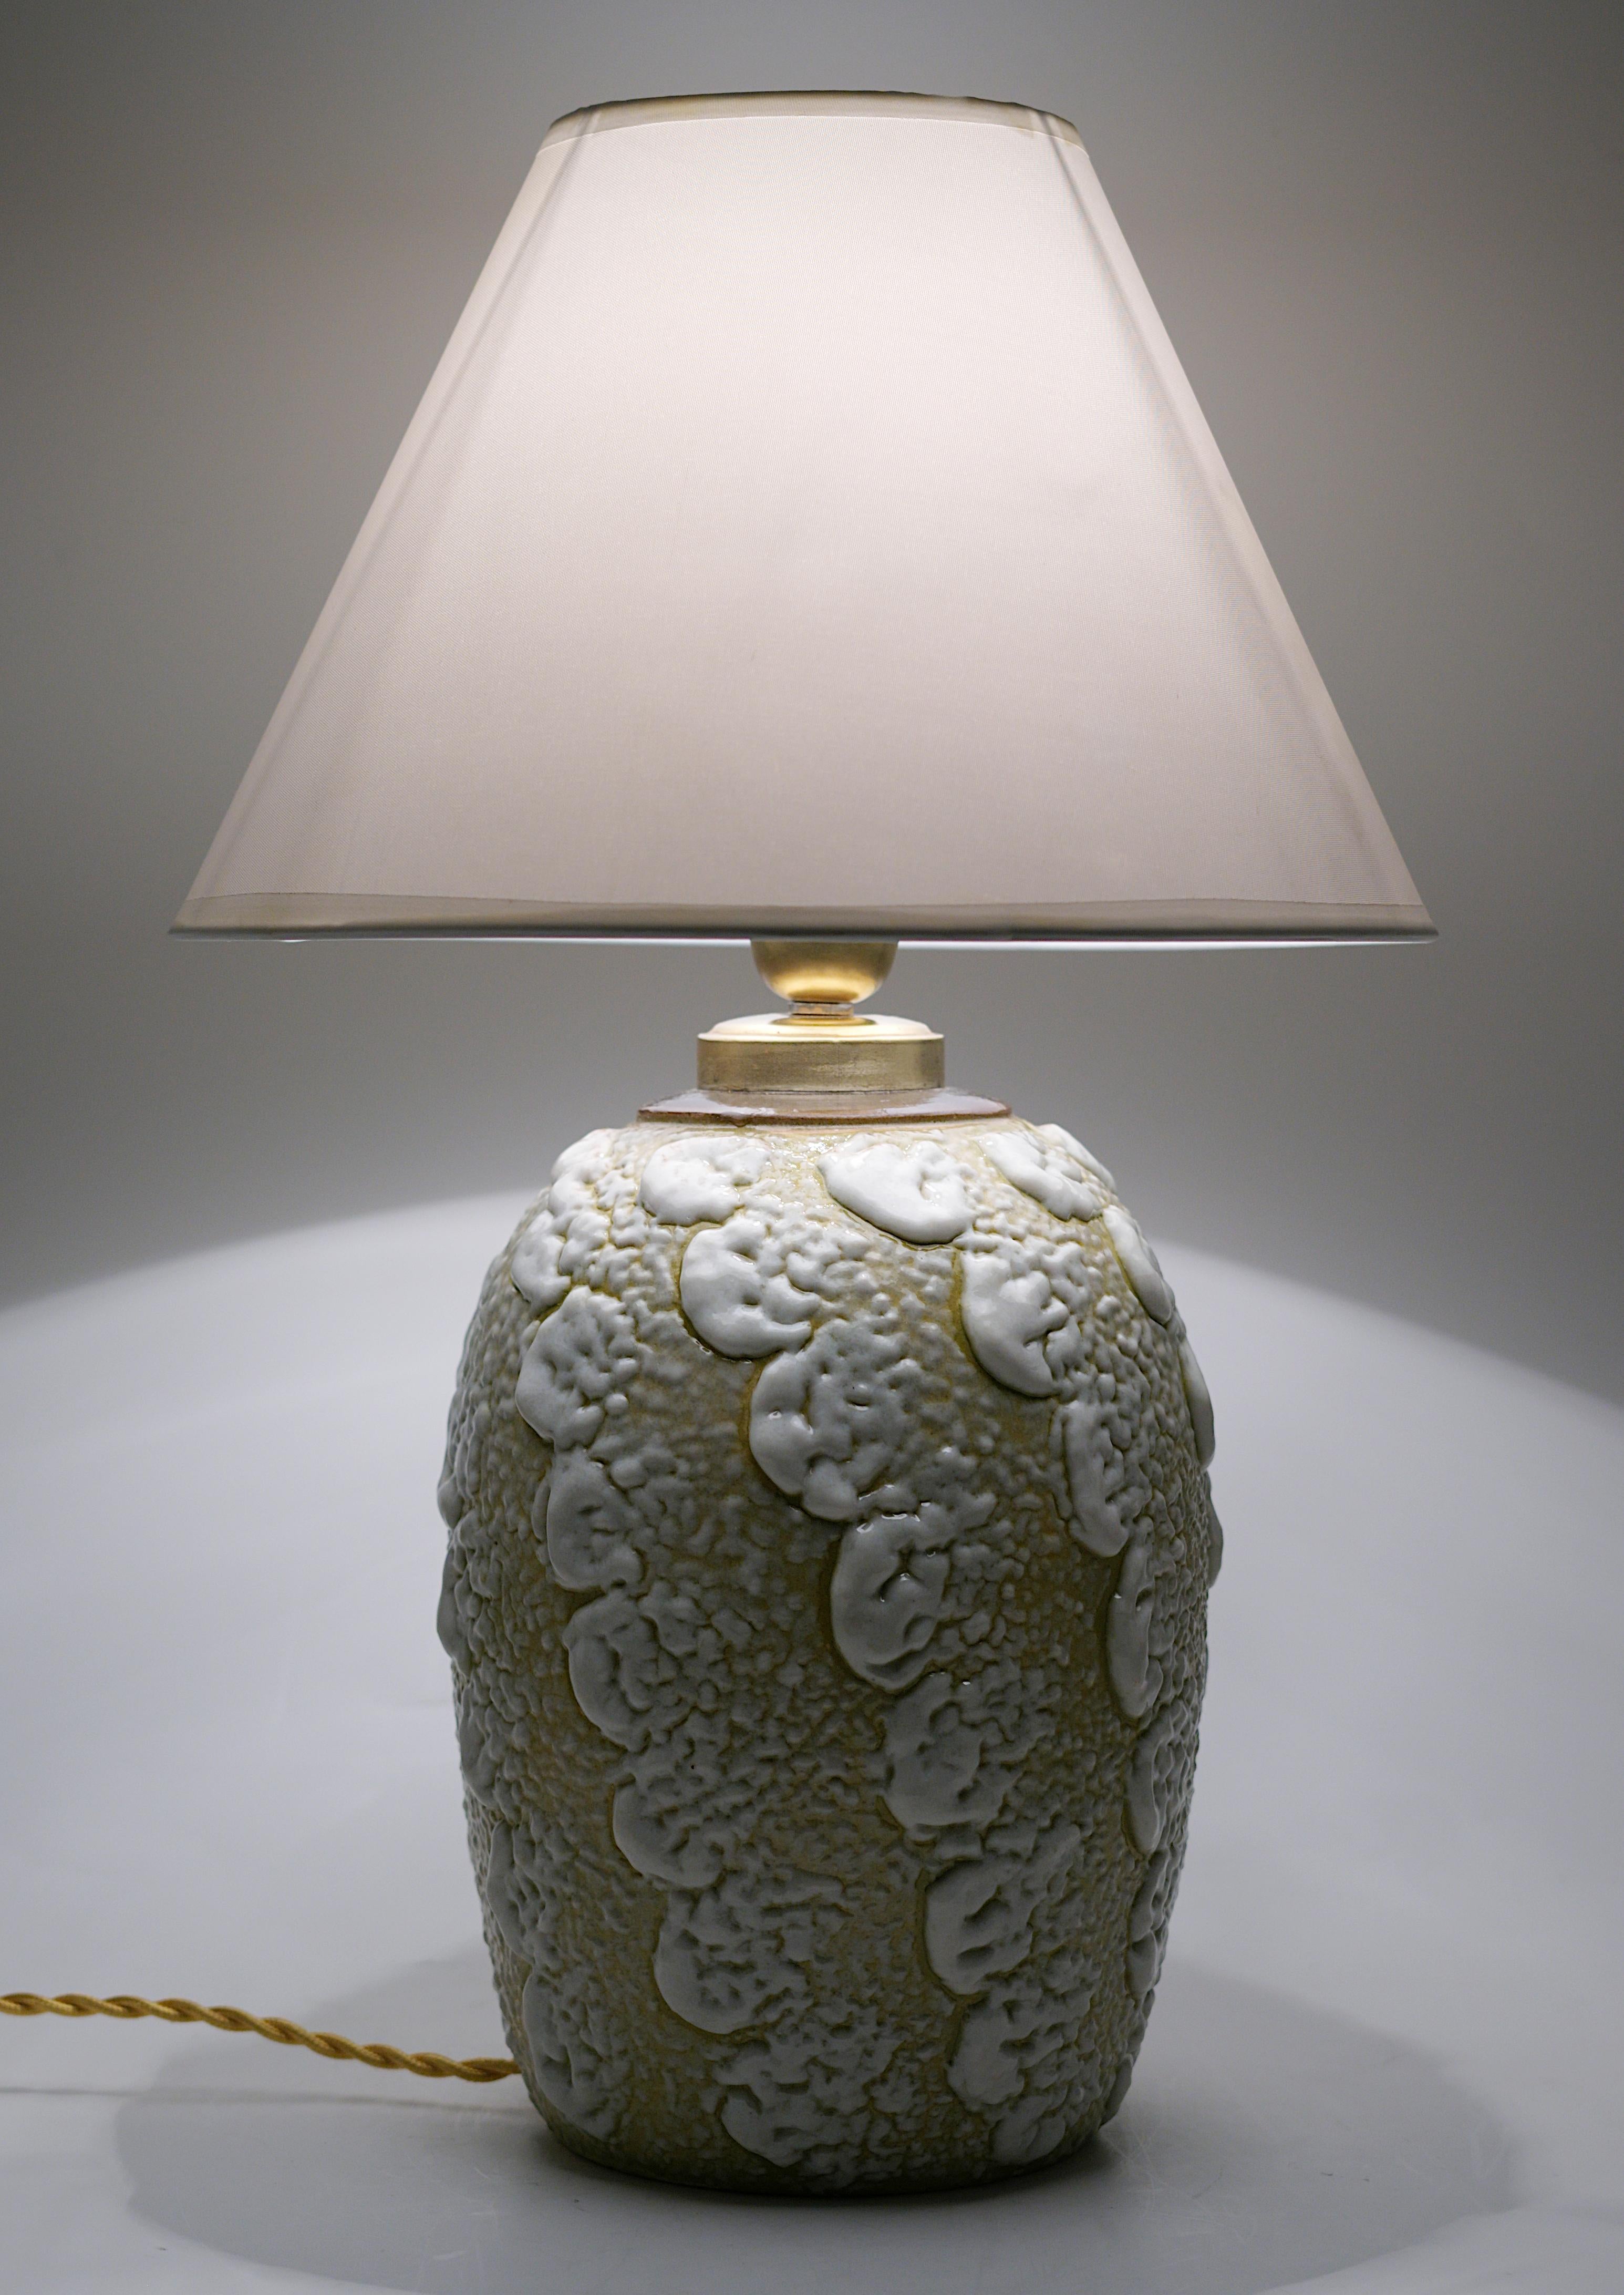 Louis Dage French Art Deco Stoneware Table Lamp, Late 1920s In Excellent Condition For Sale In Saint-Amans-des-Cots, FR